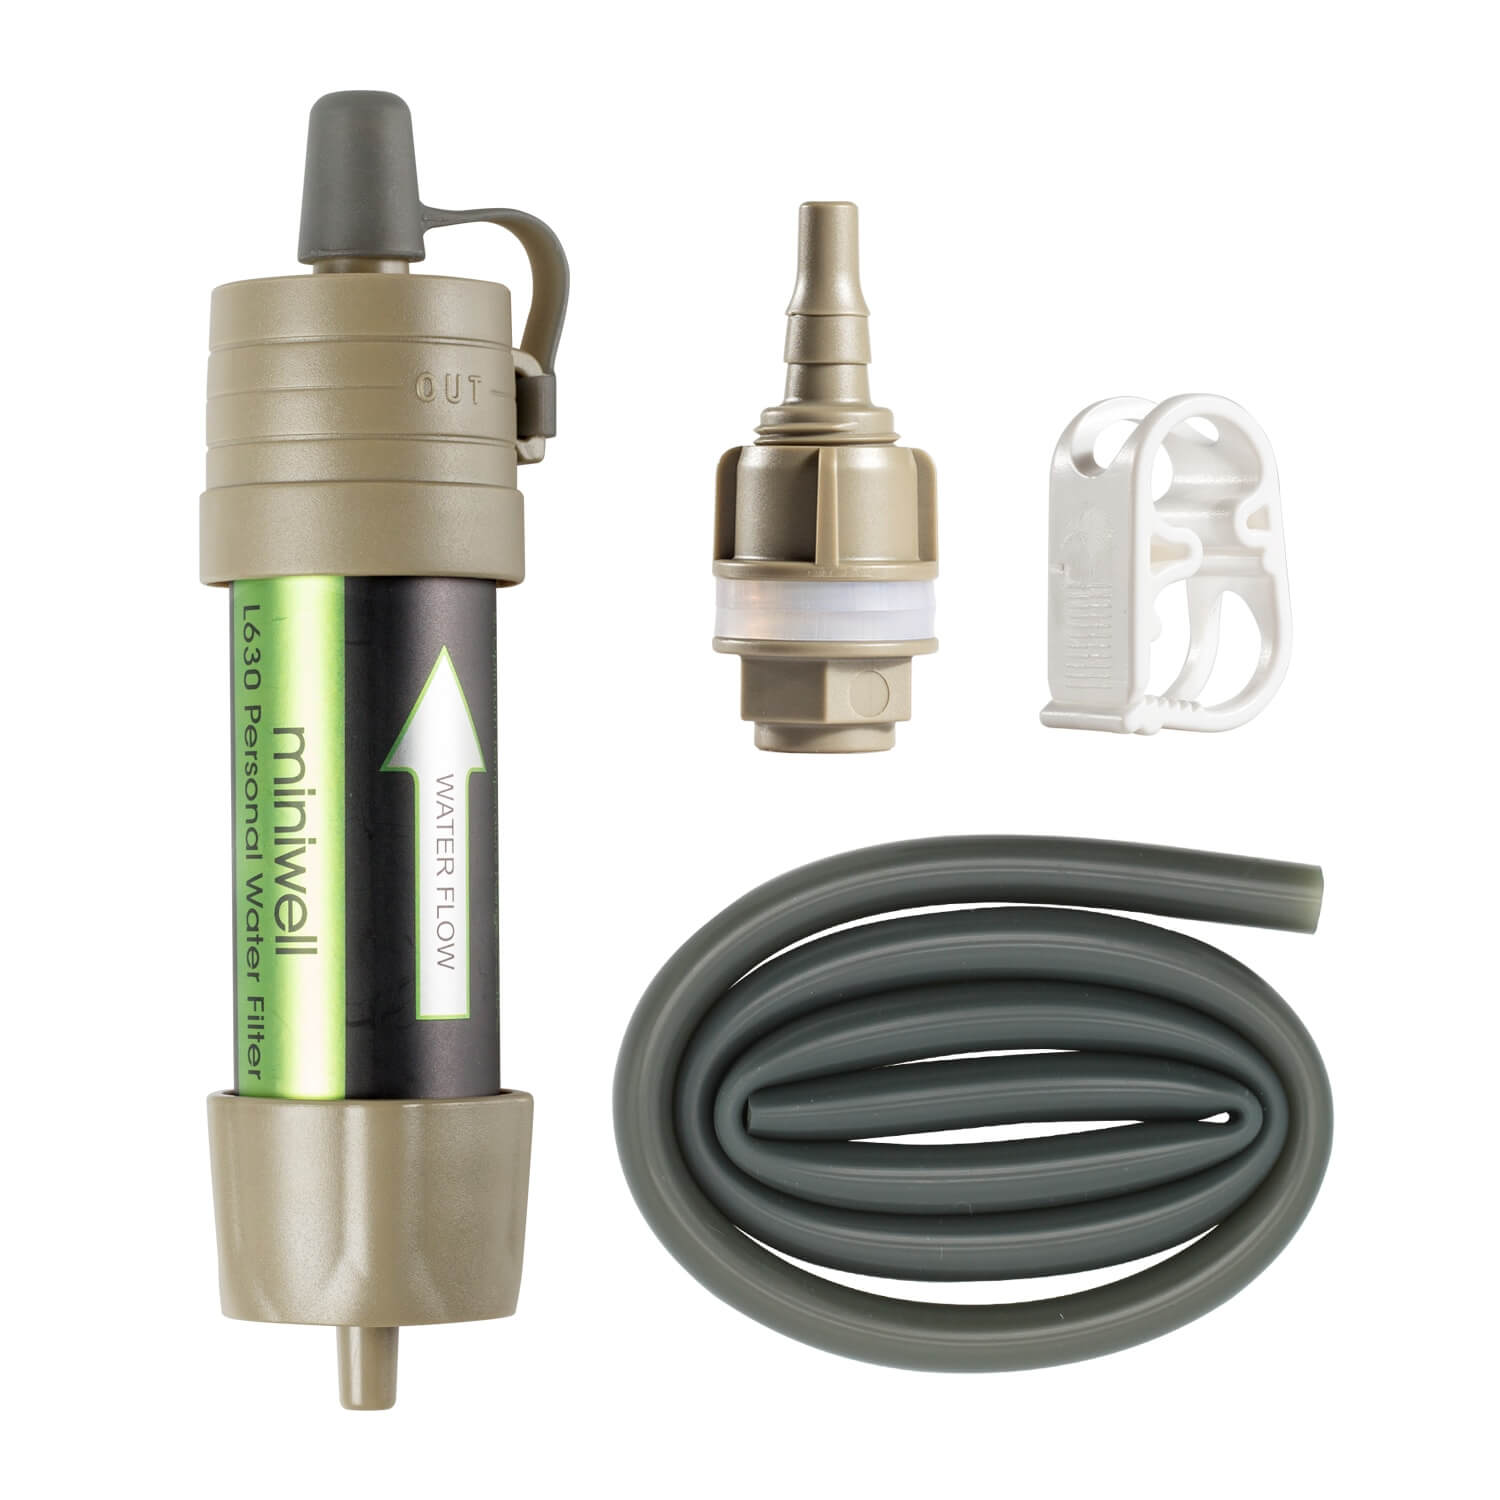 Purify water on the go with our portable filter kit